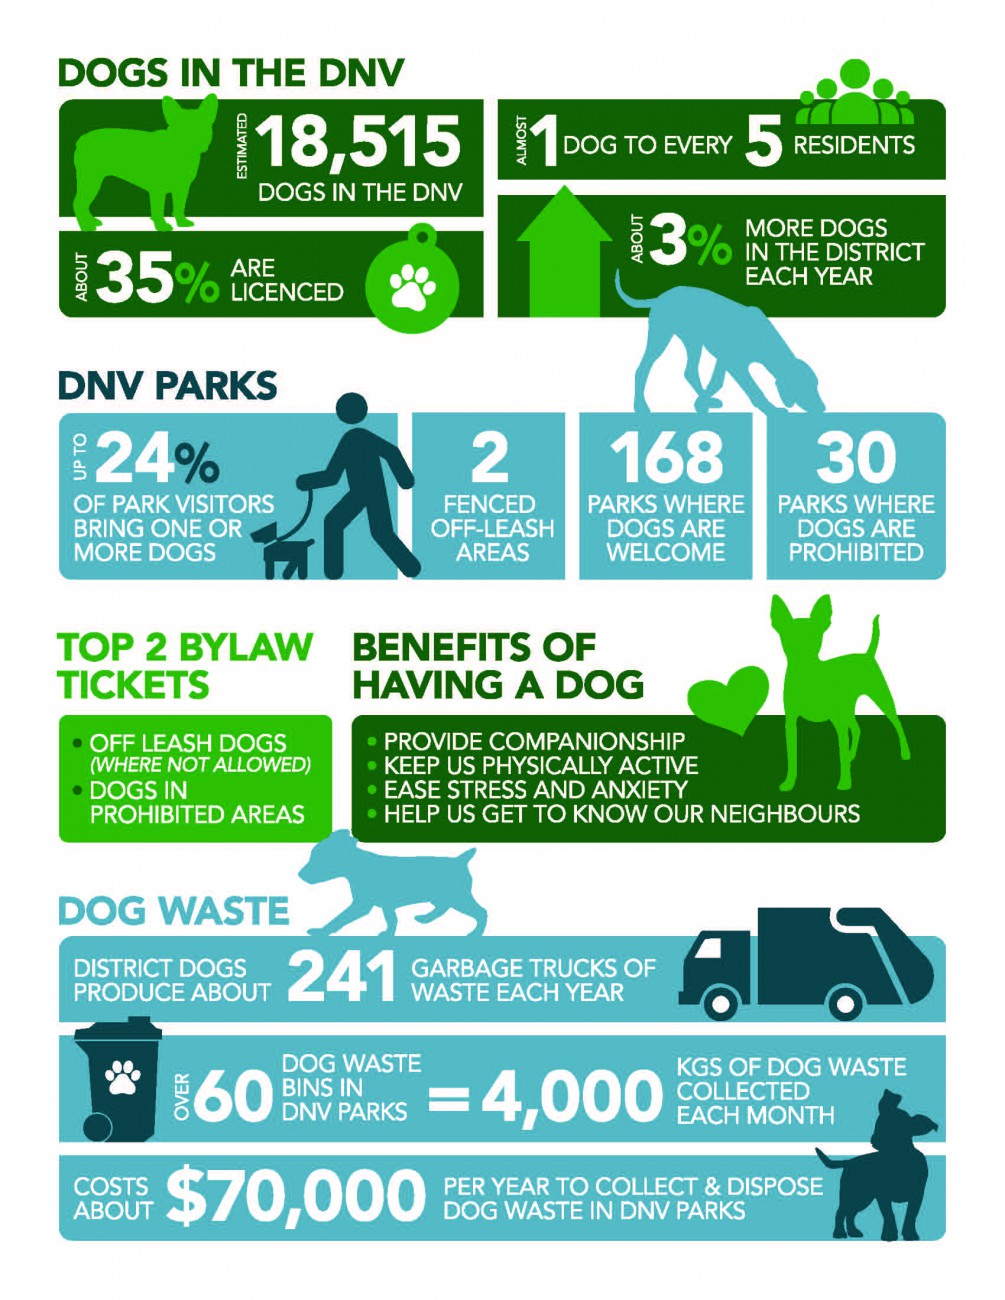  An infographic about dogs in the DNV. There are an estimated 18,515 dogs in the DNV, which is 1 dog to every 5 residents. About 35 percent of dogs are licenced. 